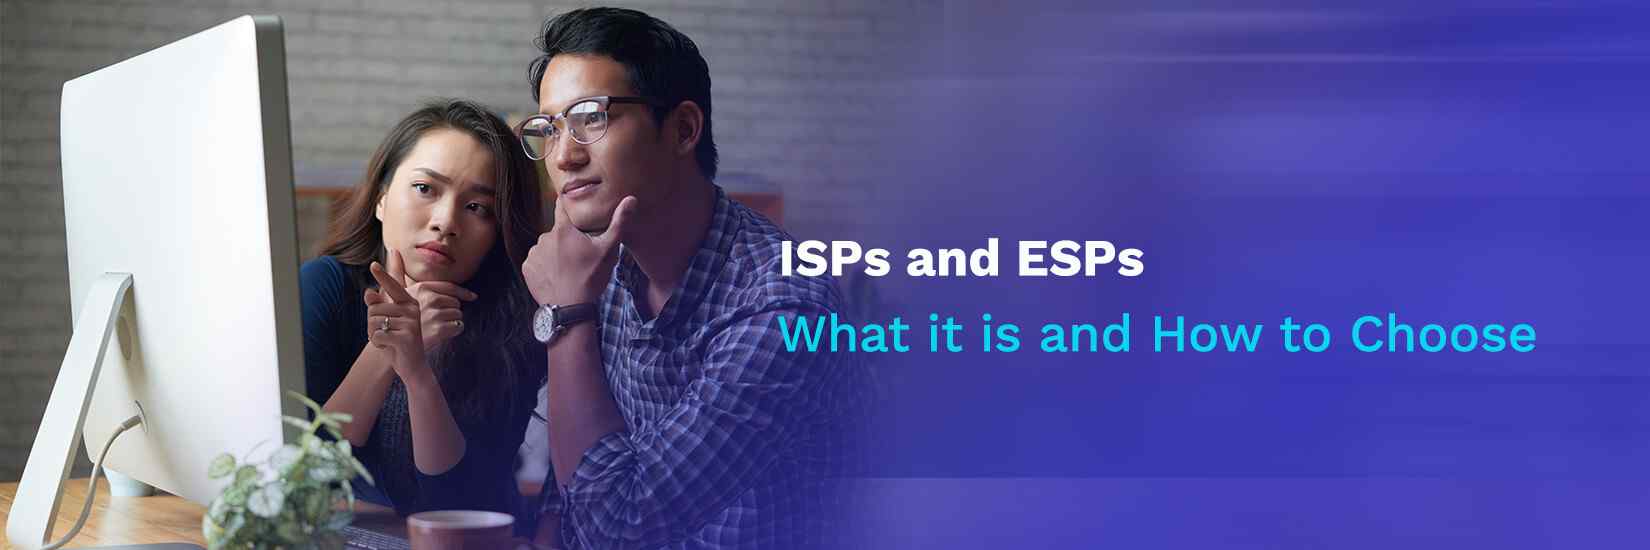 ISPs and ESPs: What It Is and How to Choose